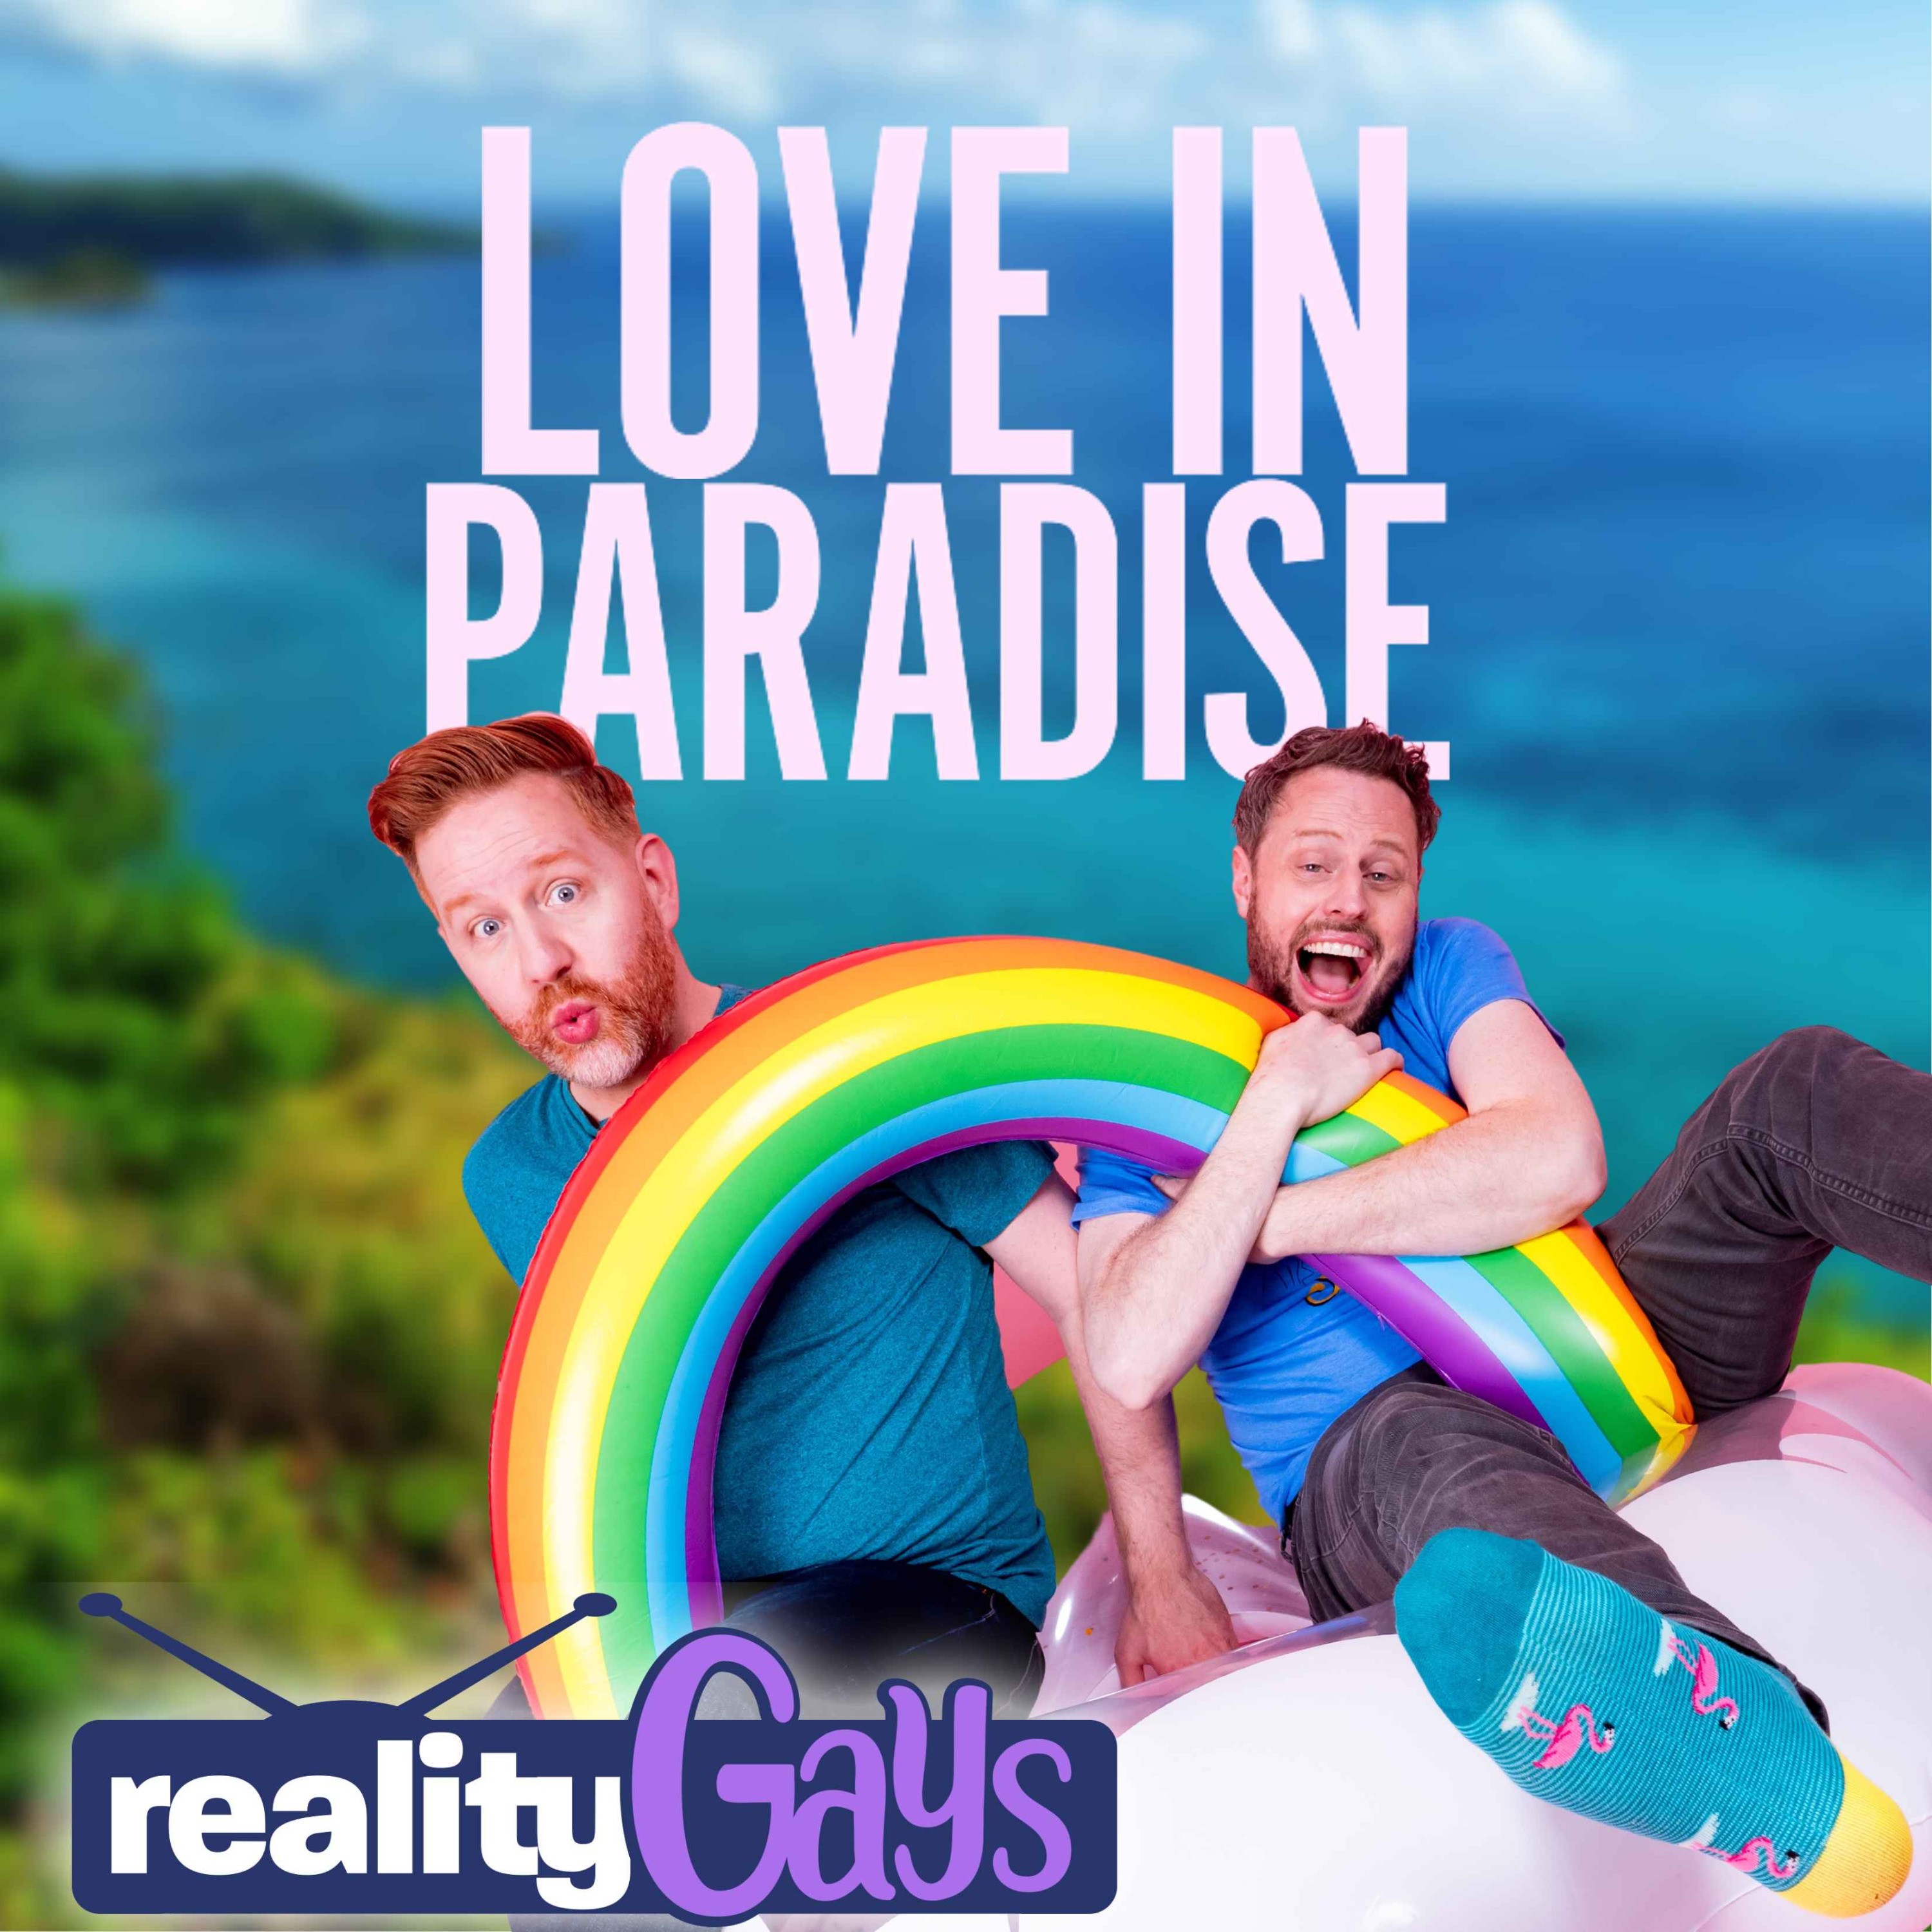 Reality Gays: Trash TV and GayDD with Mattie and Poodle - Love in Paradise: The Caribbean, A 90 Day Story: 0207 &quot;The Bottom Line&quot;